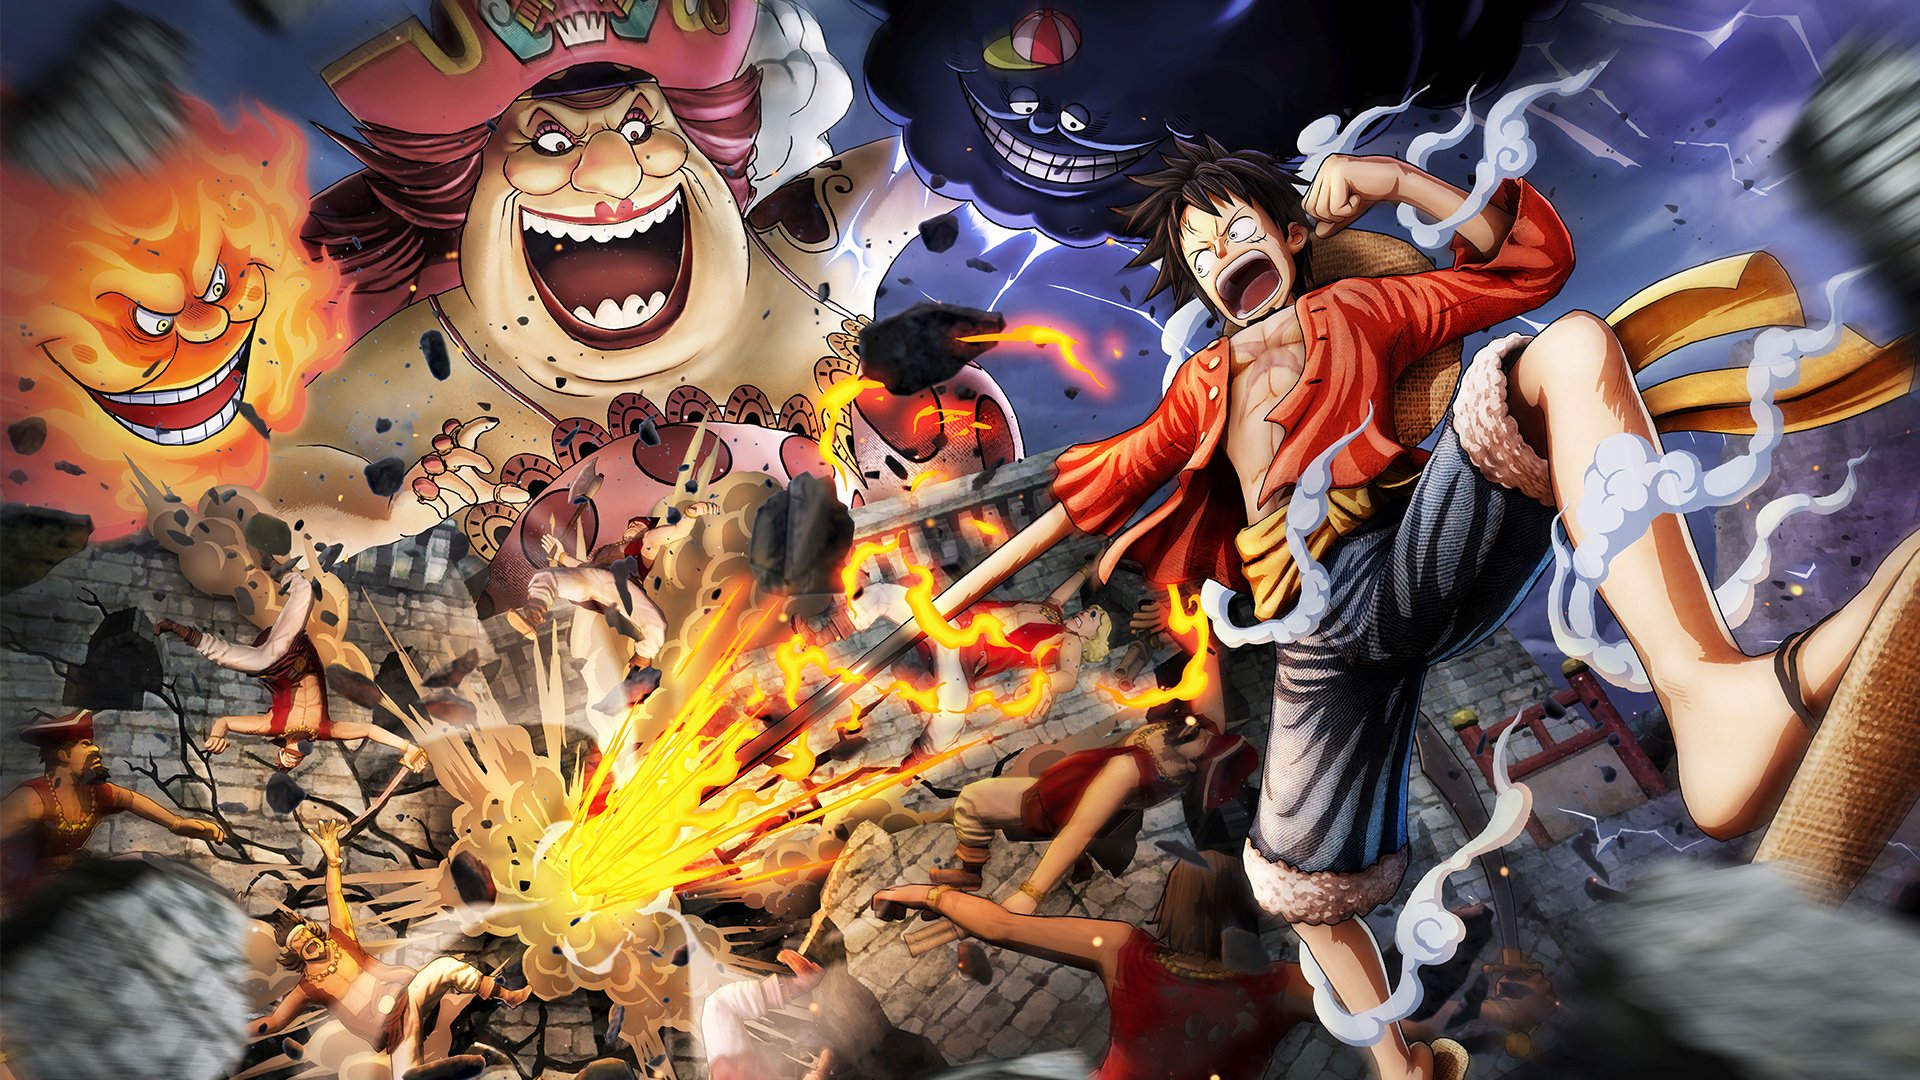 One Piece: Pirate Warriors 4 heading to Switch in 2020